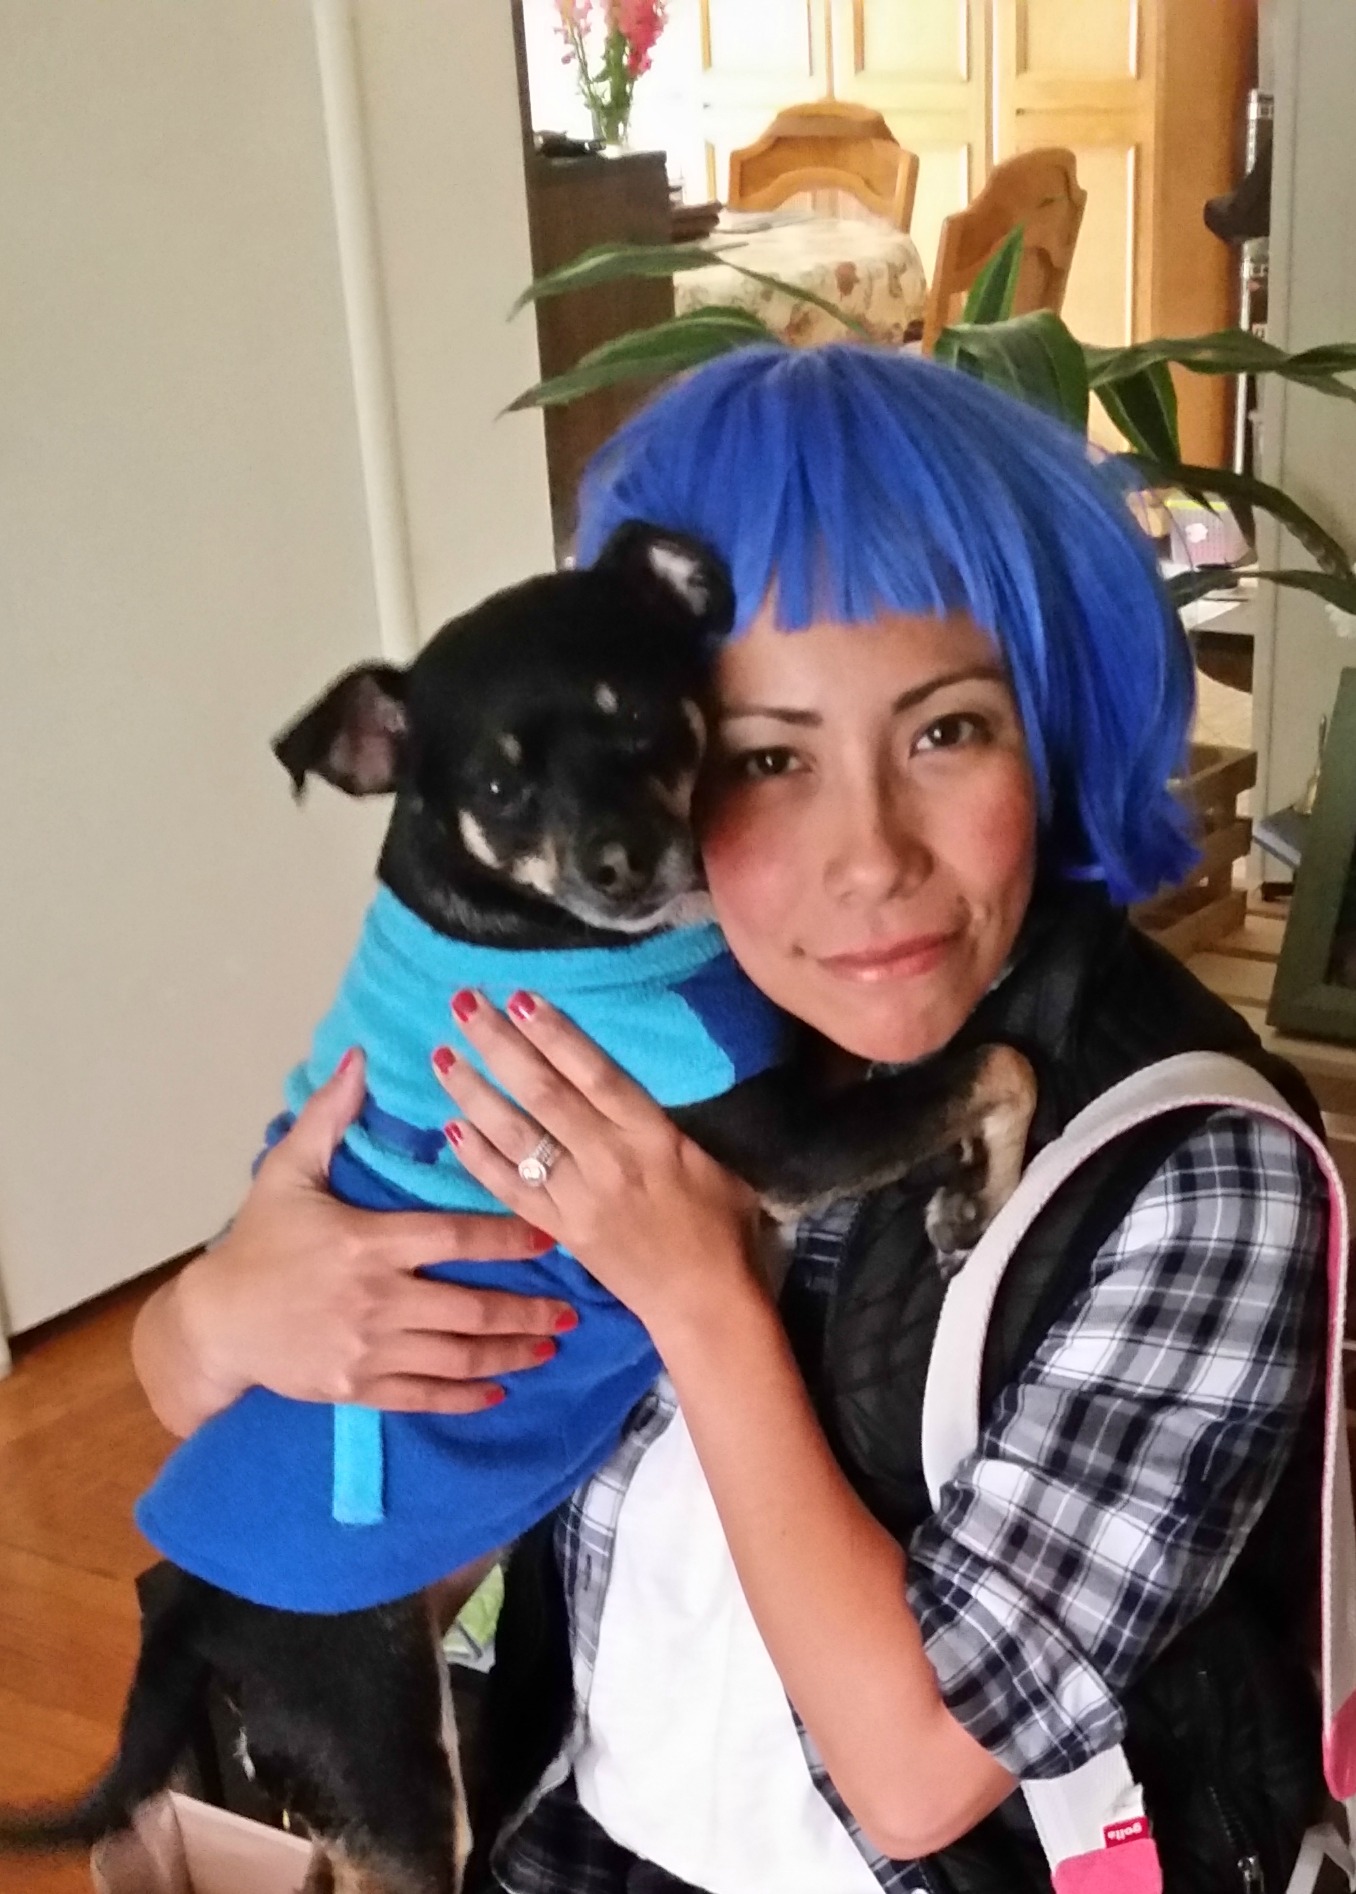 Girl with blue hair and her dog hugging her